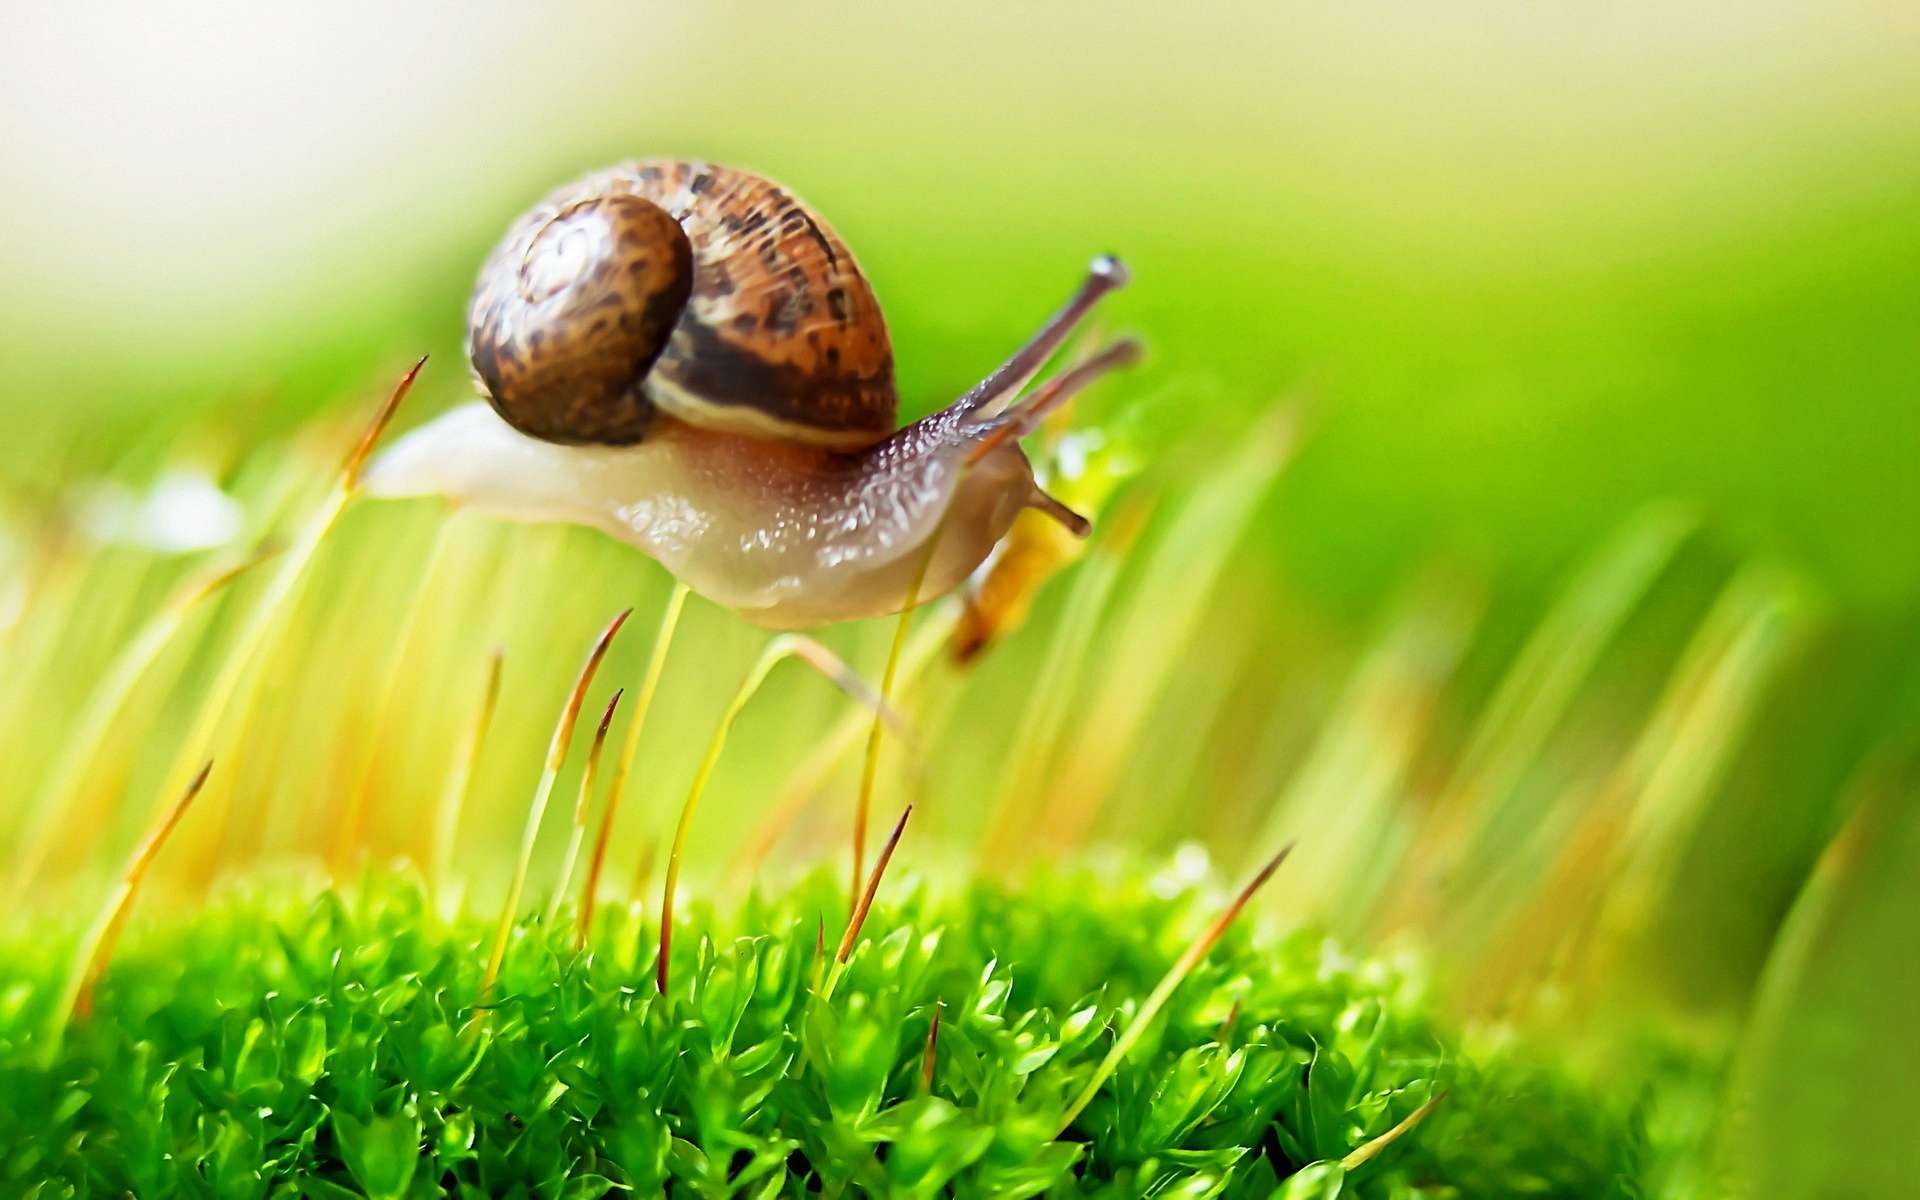 snail 1080P 2k 4k Full HD Wallpapers Backgrounds Free Download   Wallpaper Crafter